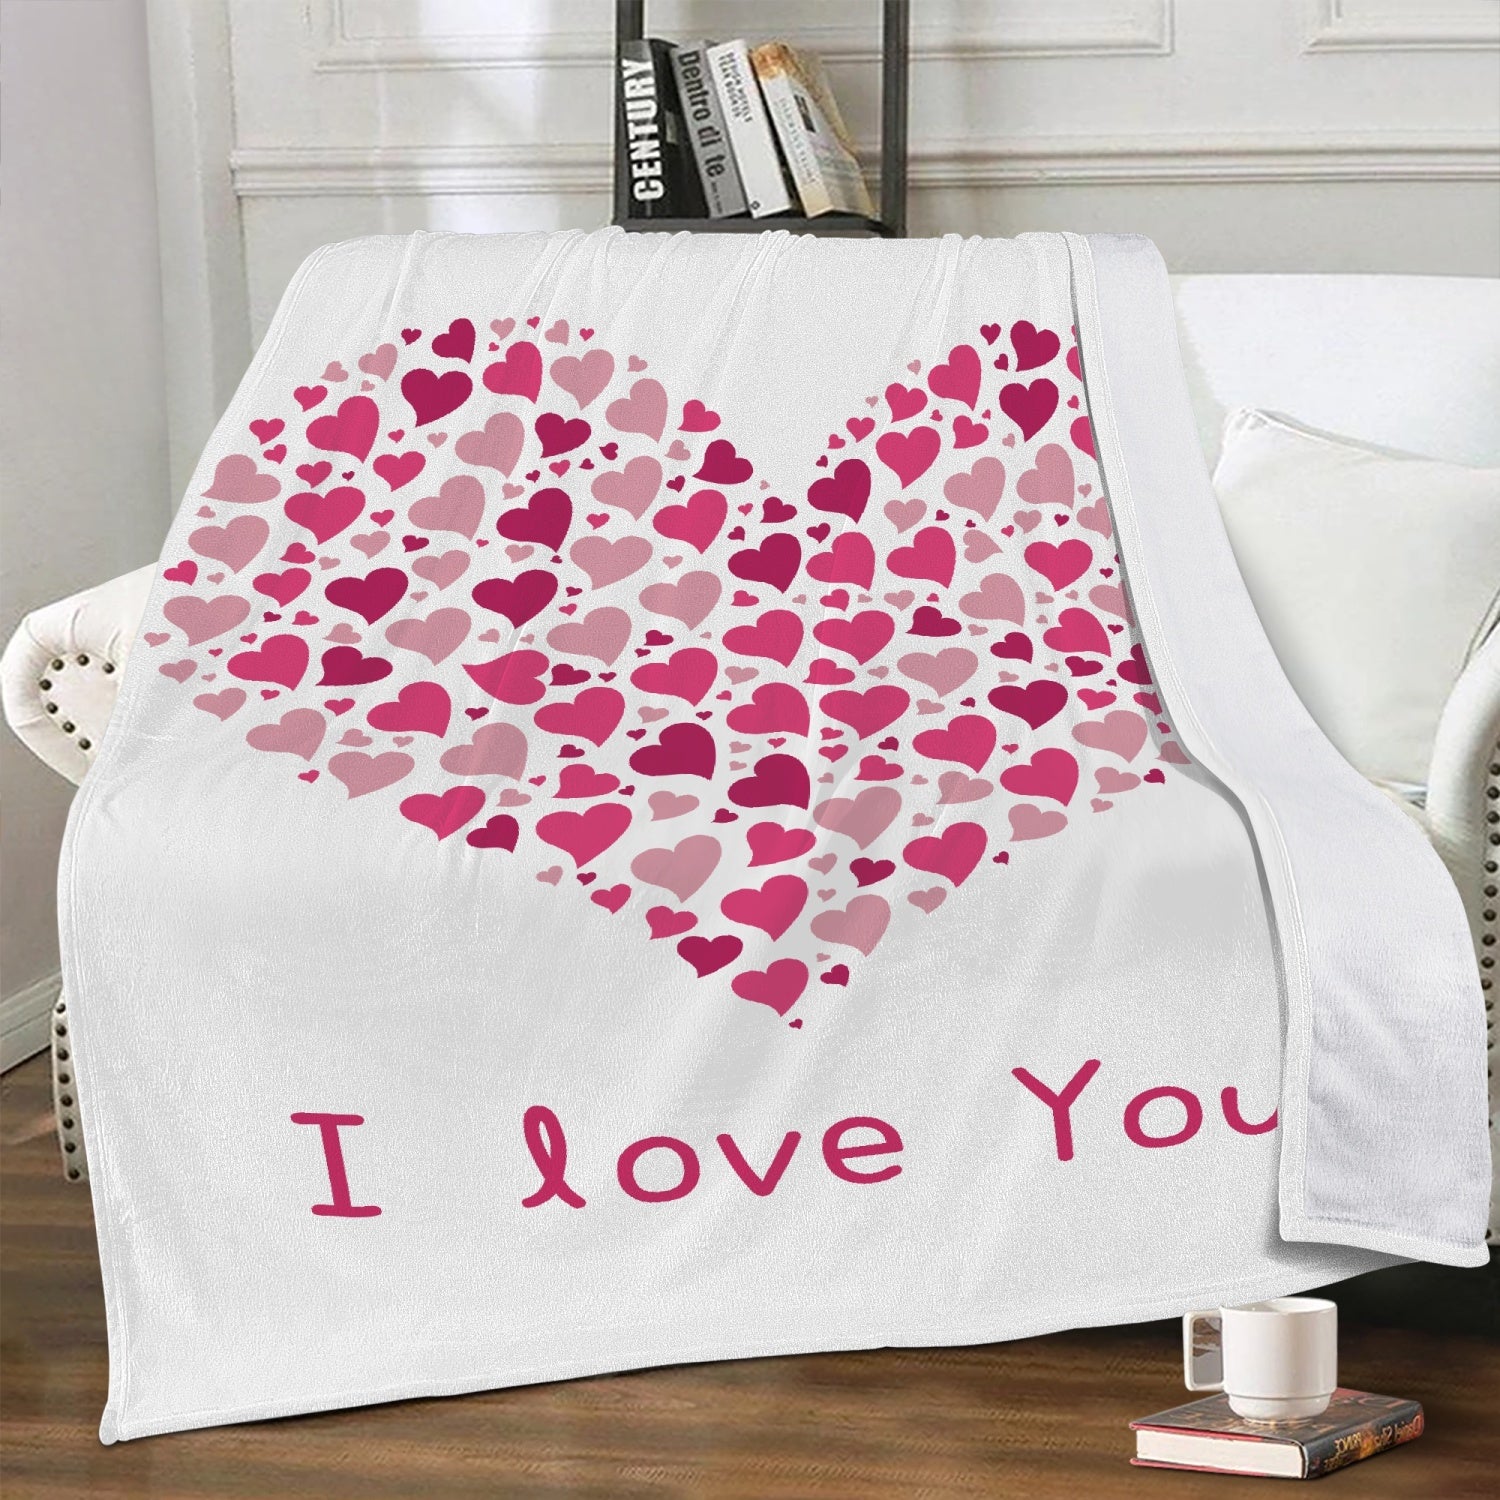 Trends Dual-sided Stitched Blanket I love You Home-clothes-jewelry